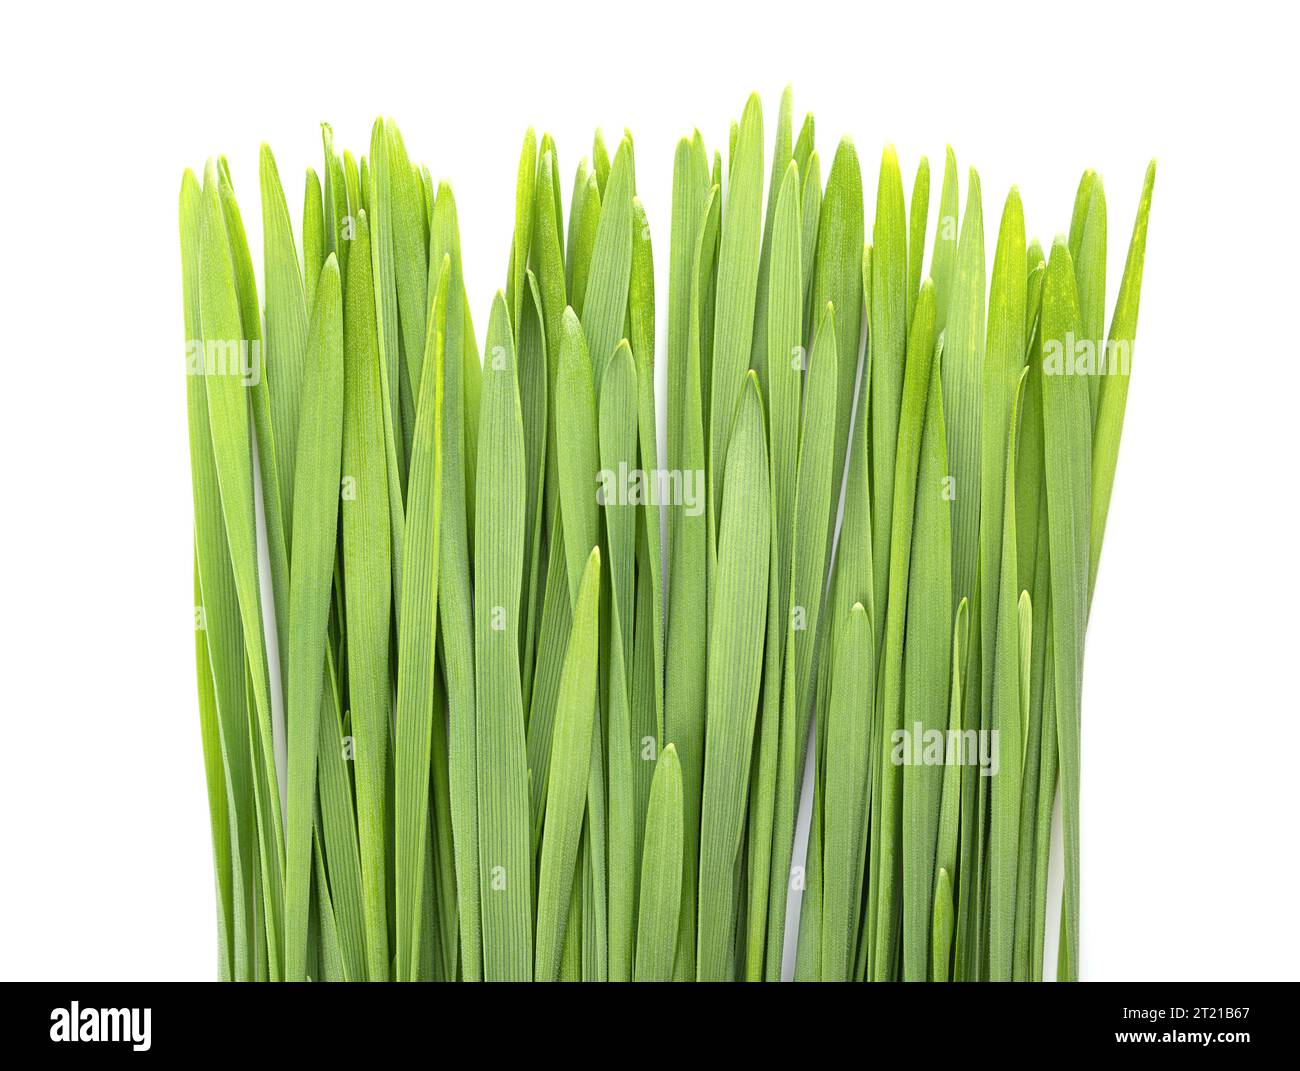 Wheatgrass from above. Freshly sprouted first leaves of common wheat Triticum aestivum, used for food, drink, or dietary supplement. Stock Photo